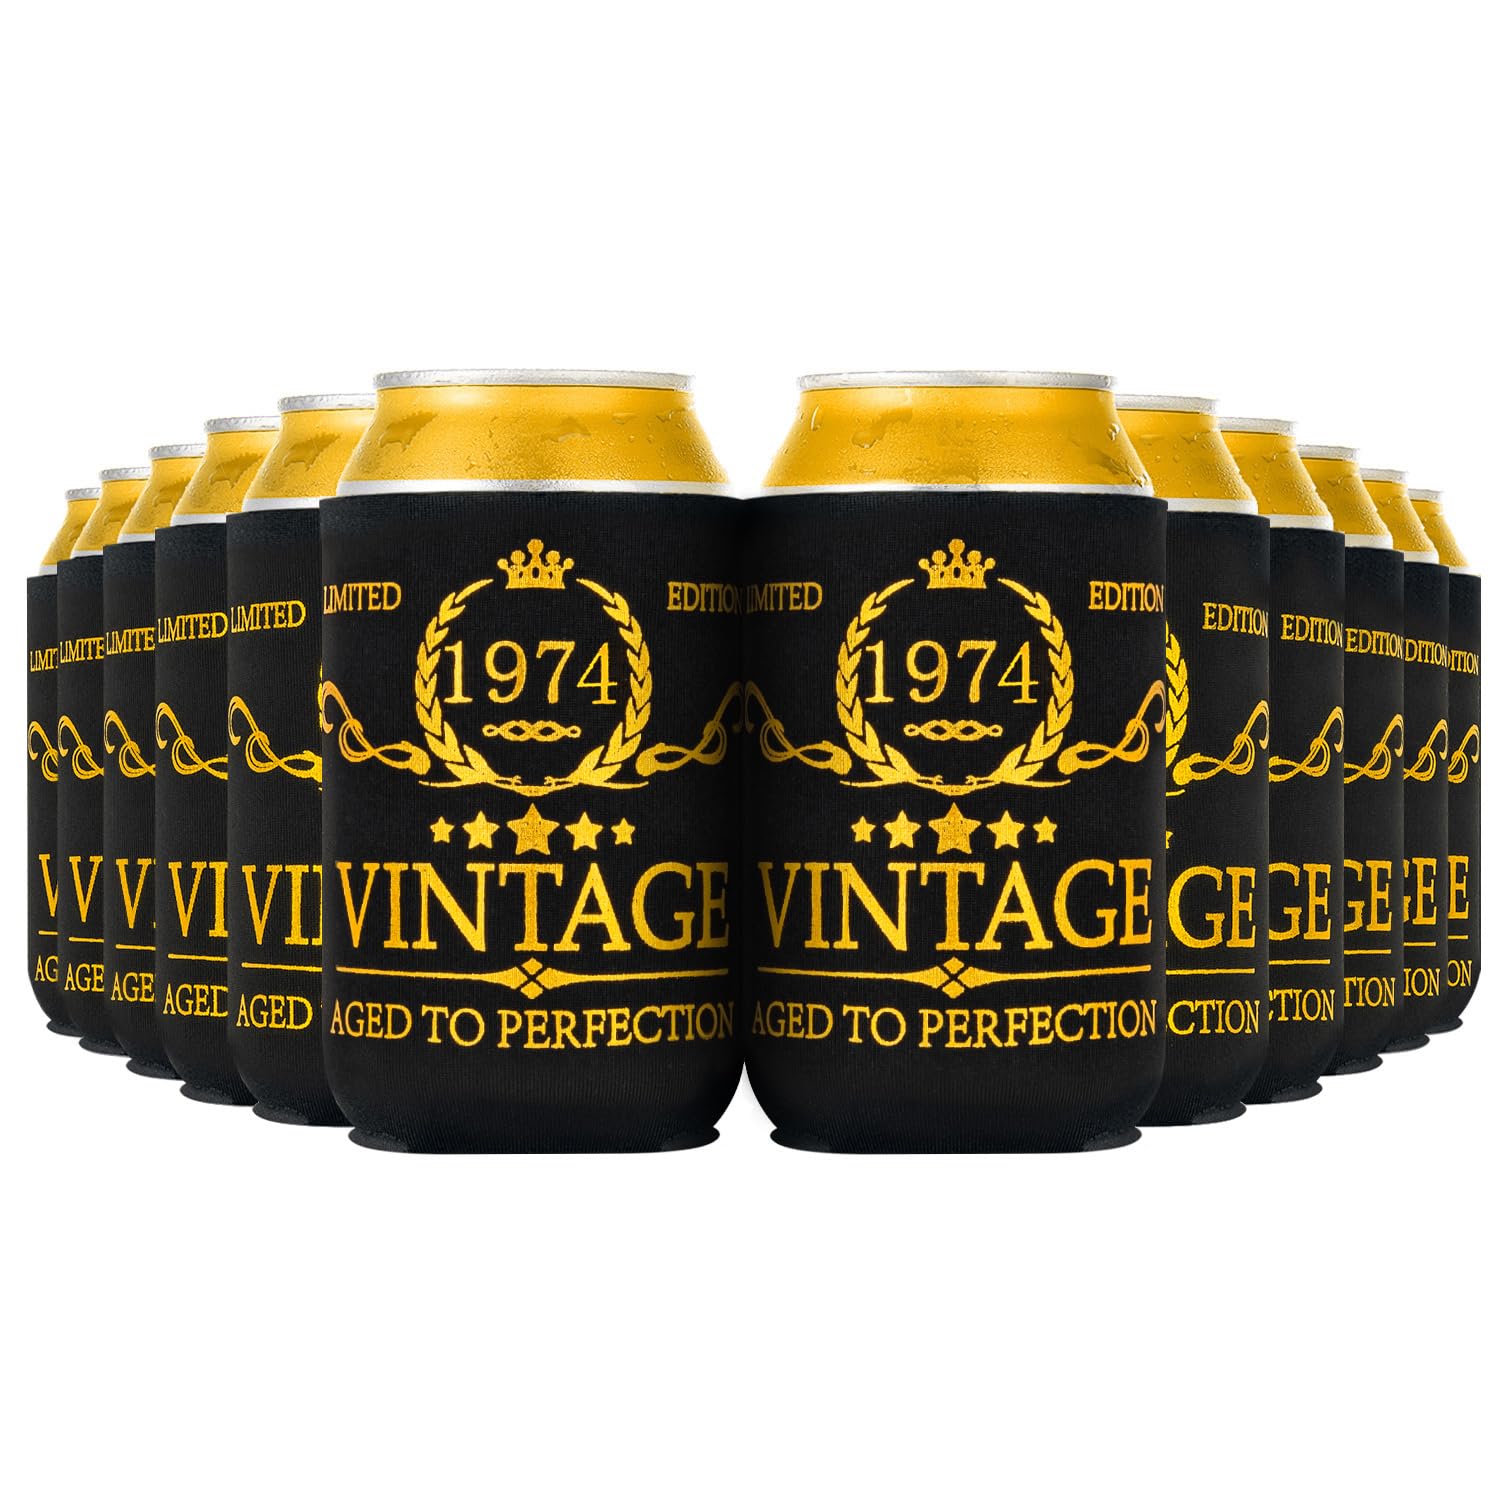 Crisky Vintage 1974 Can Coolers 50th Birthday Beer Sleeve Party Favor 50th Birthday Decoarions Black and Gold, Can Insulated Covers Neoprene Coolers for Soda, Beer, Beverage, 12 pcs